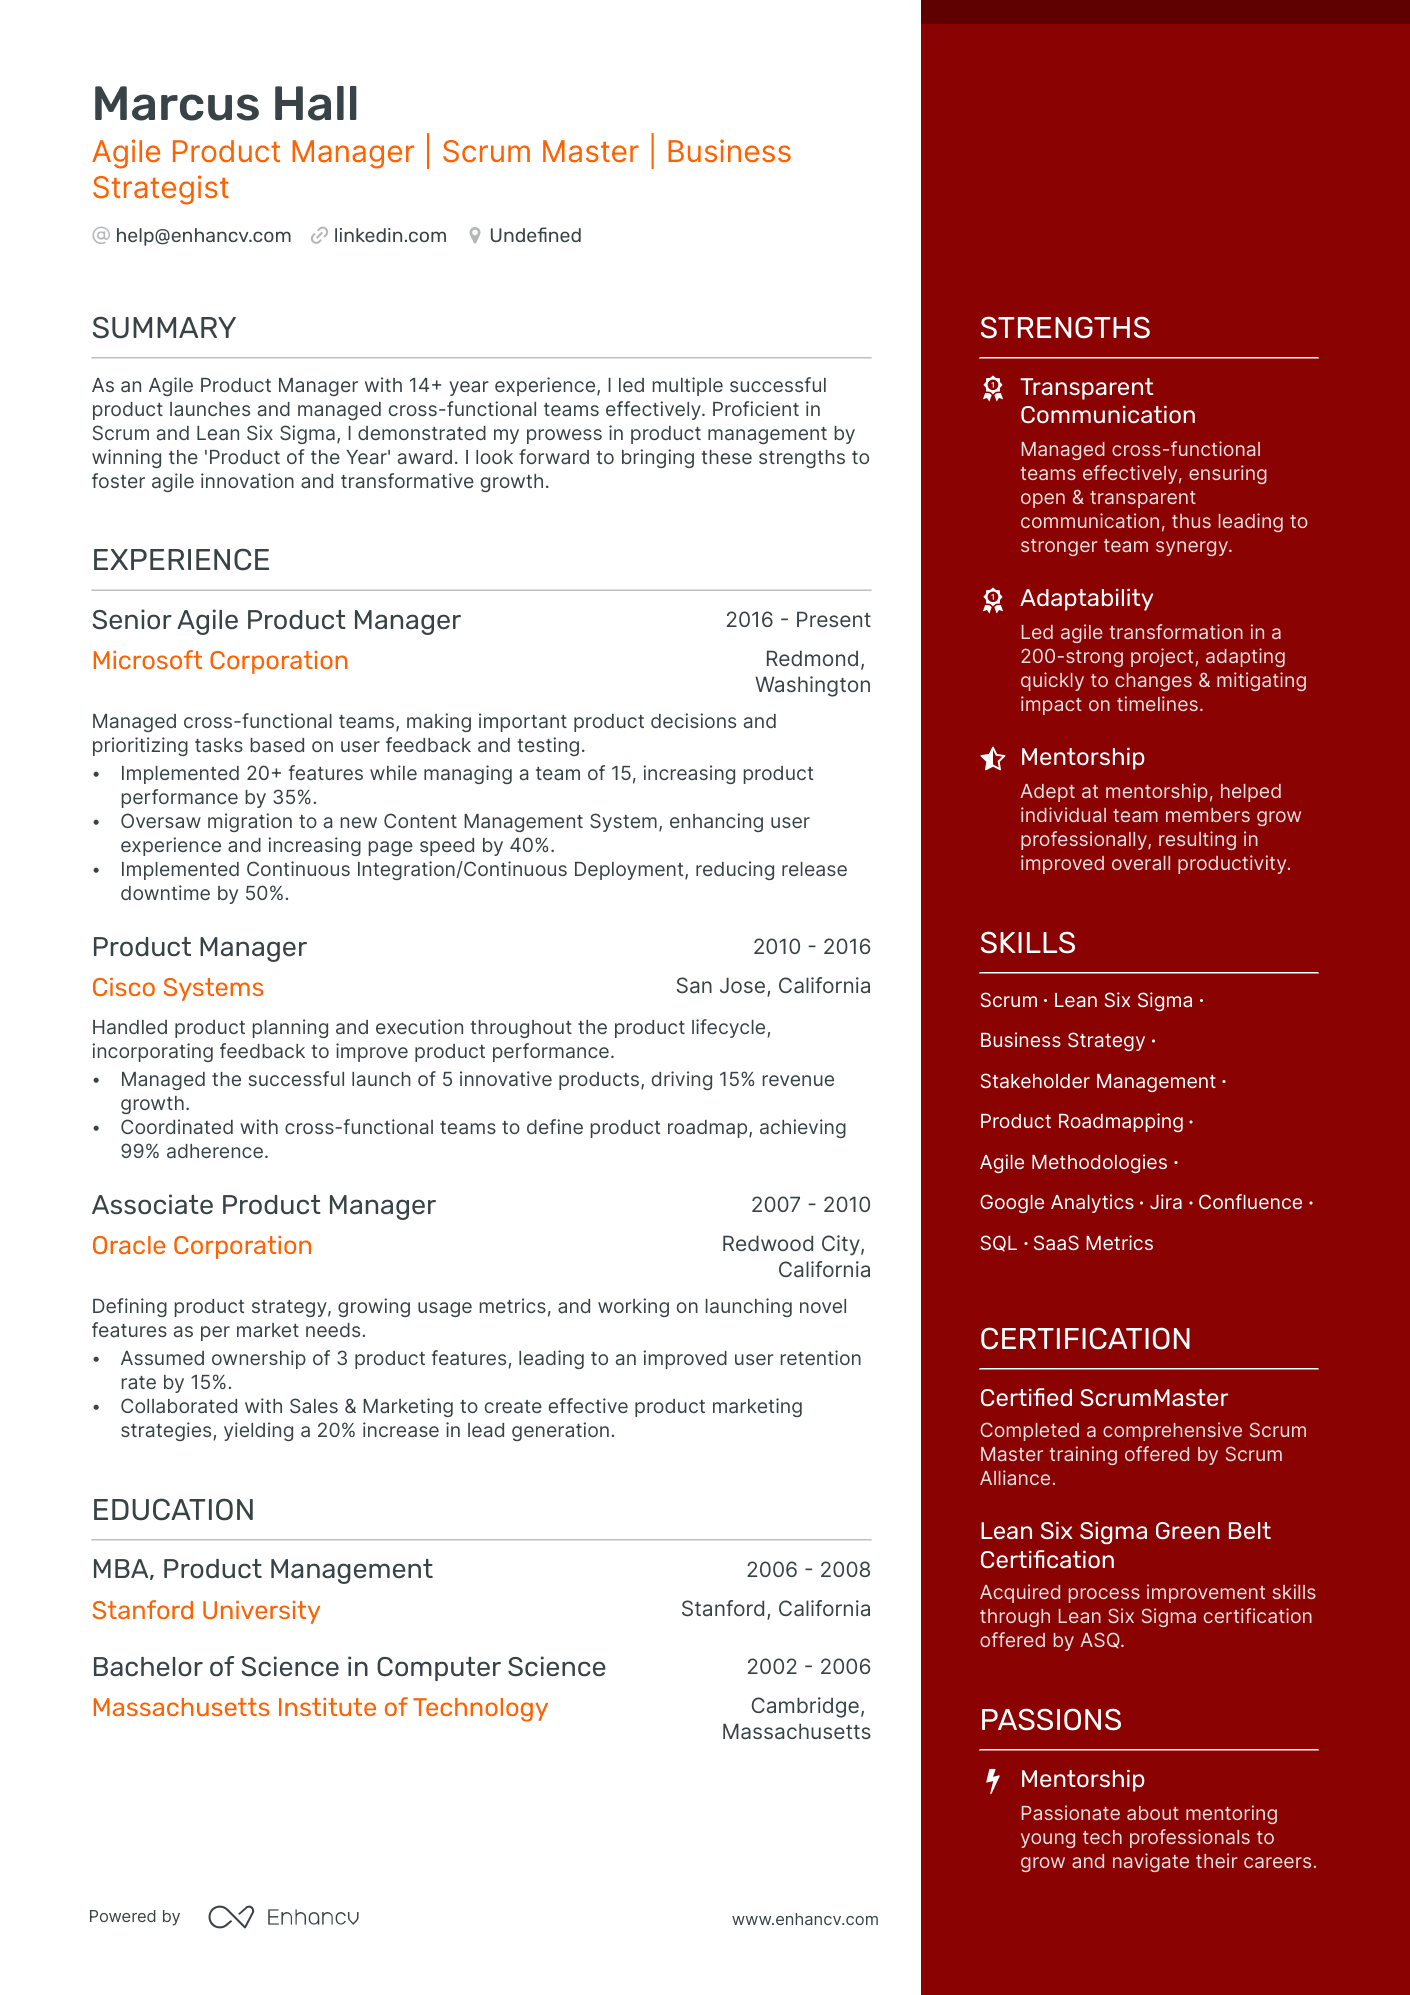 Agile Product Manager resume example